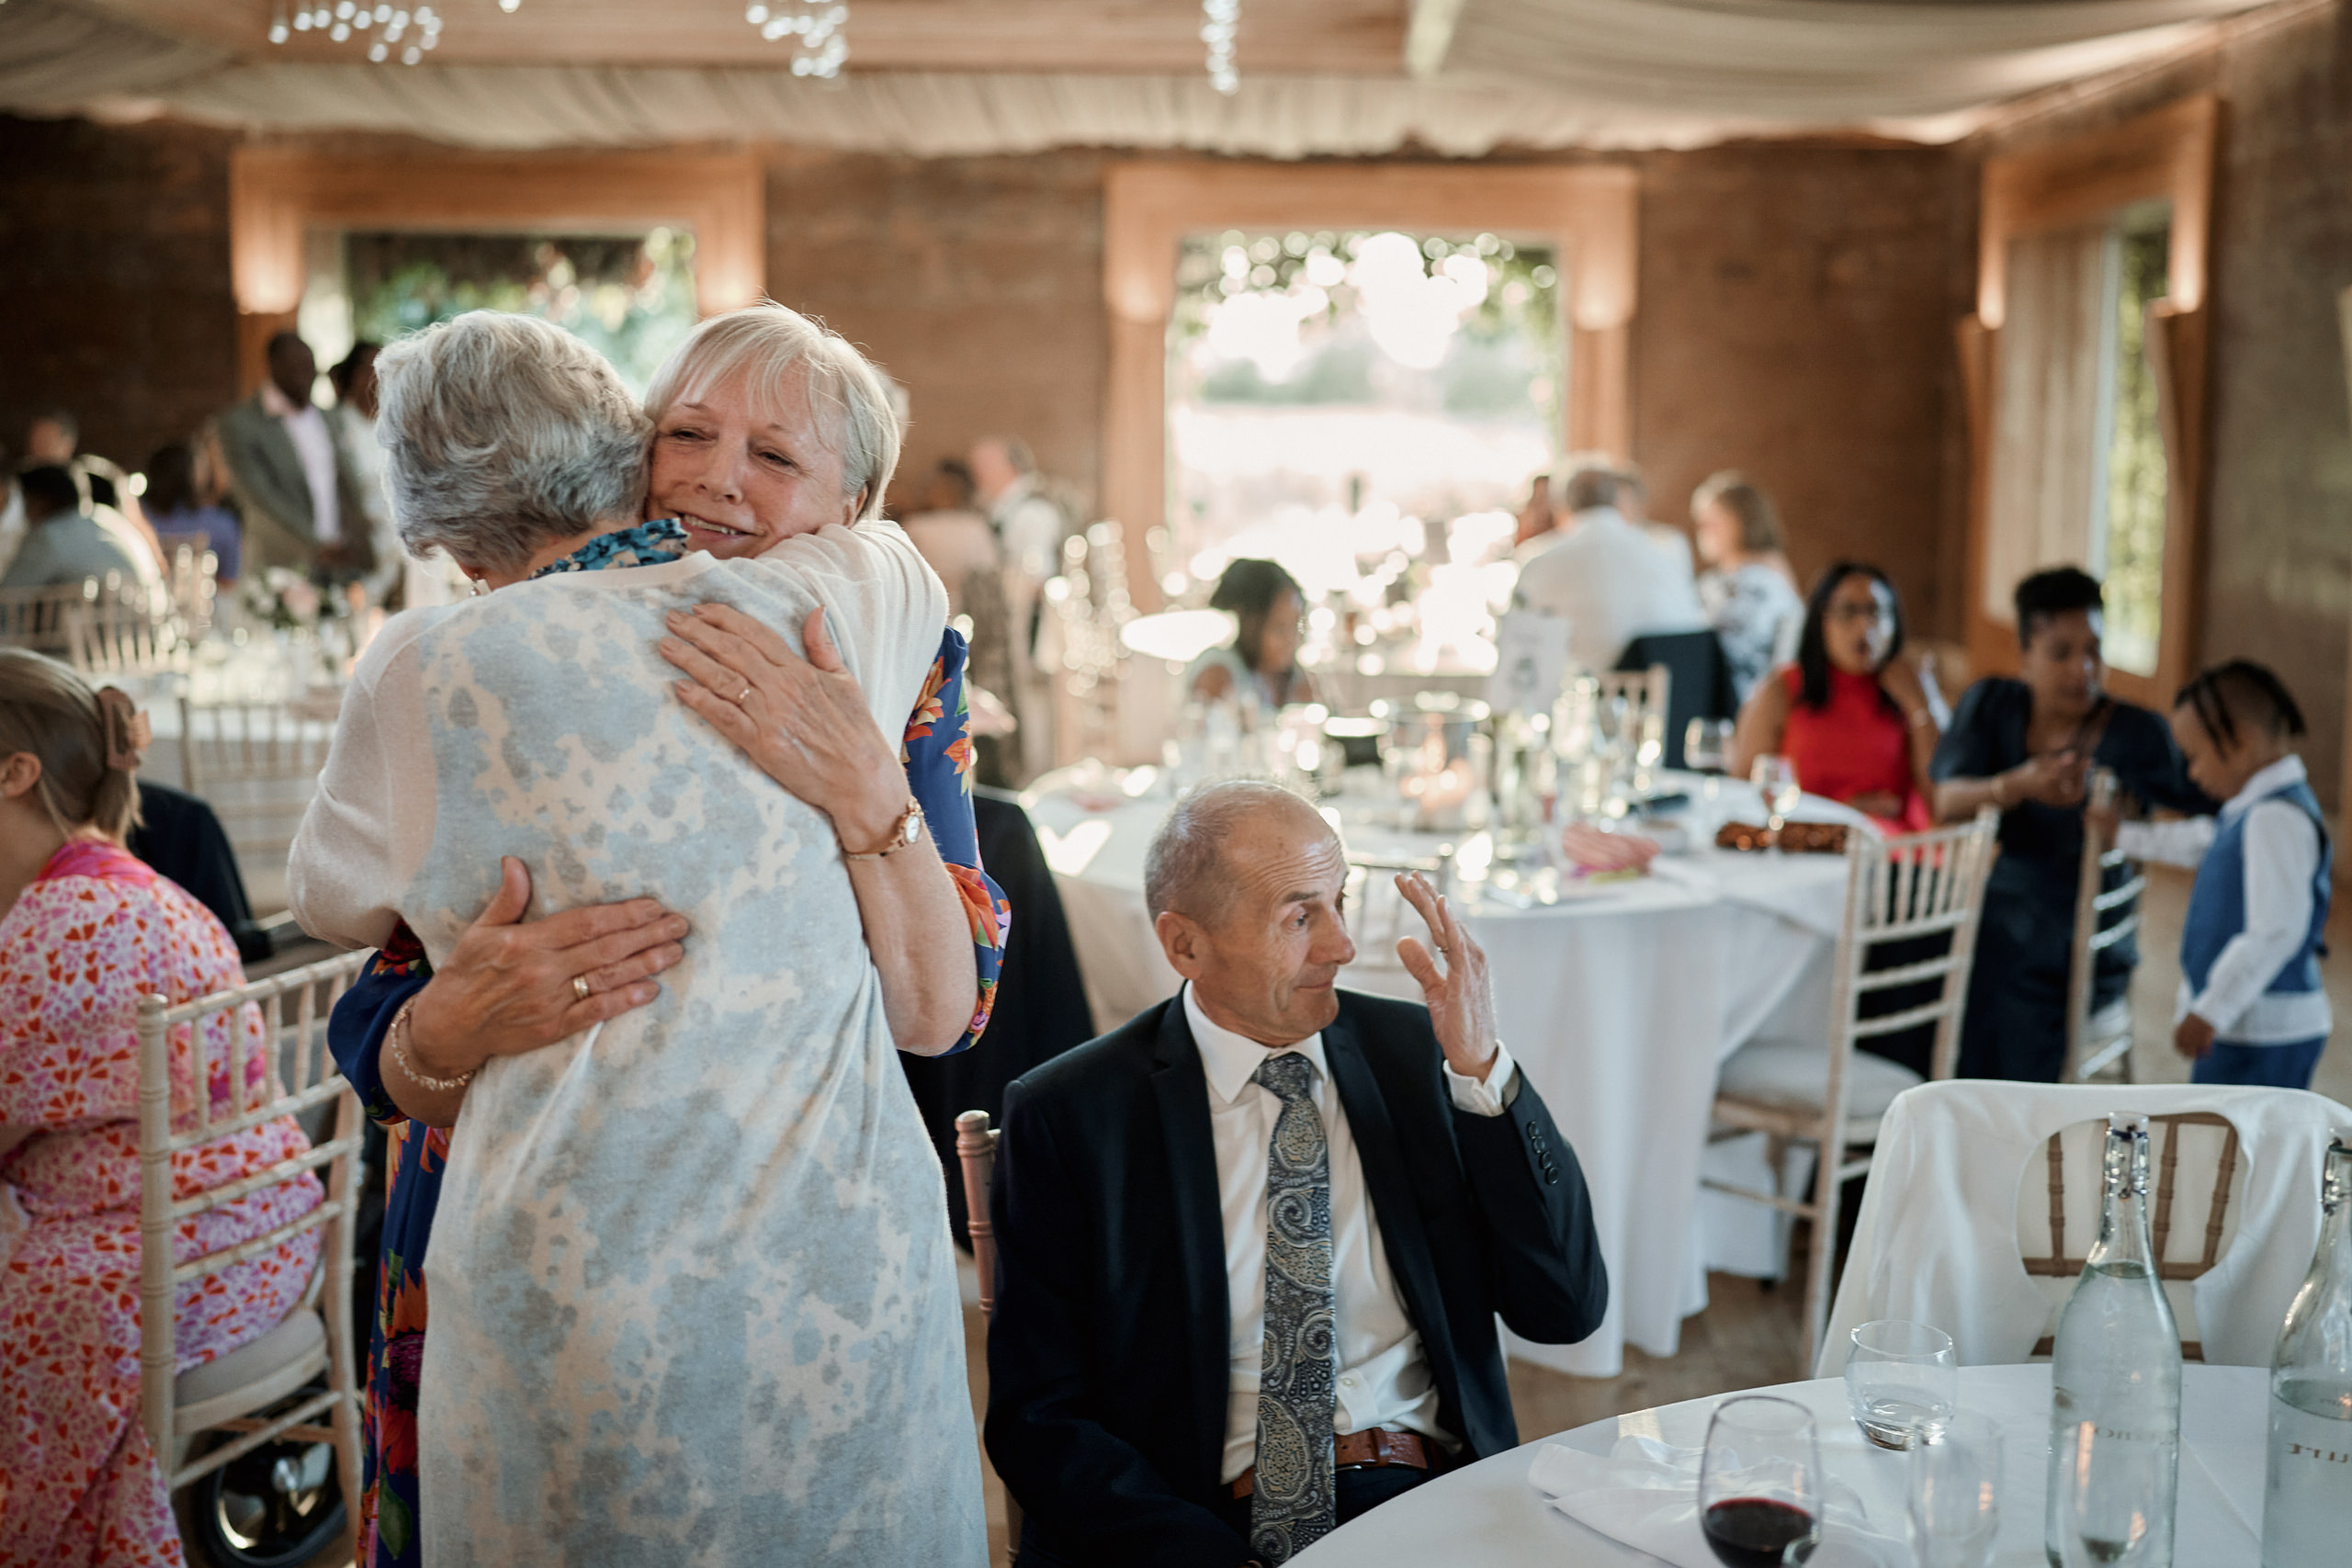 A woman is giving an older lady a hug at a wedding party.